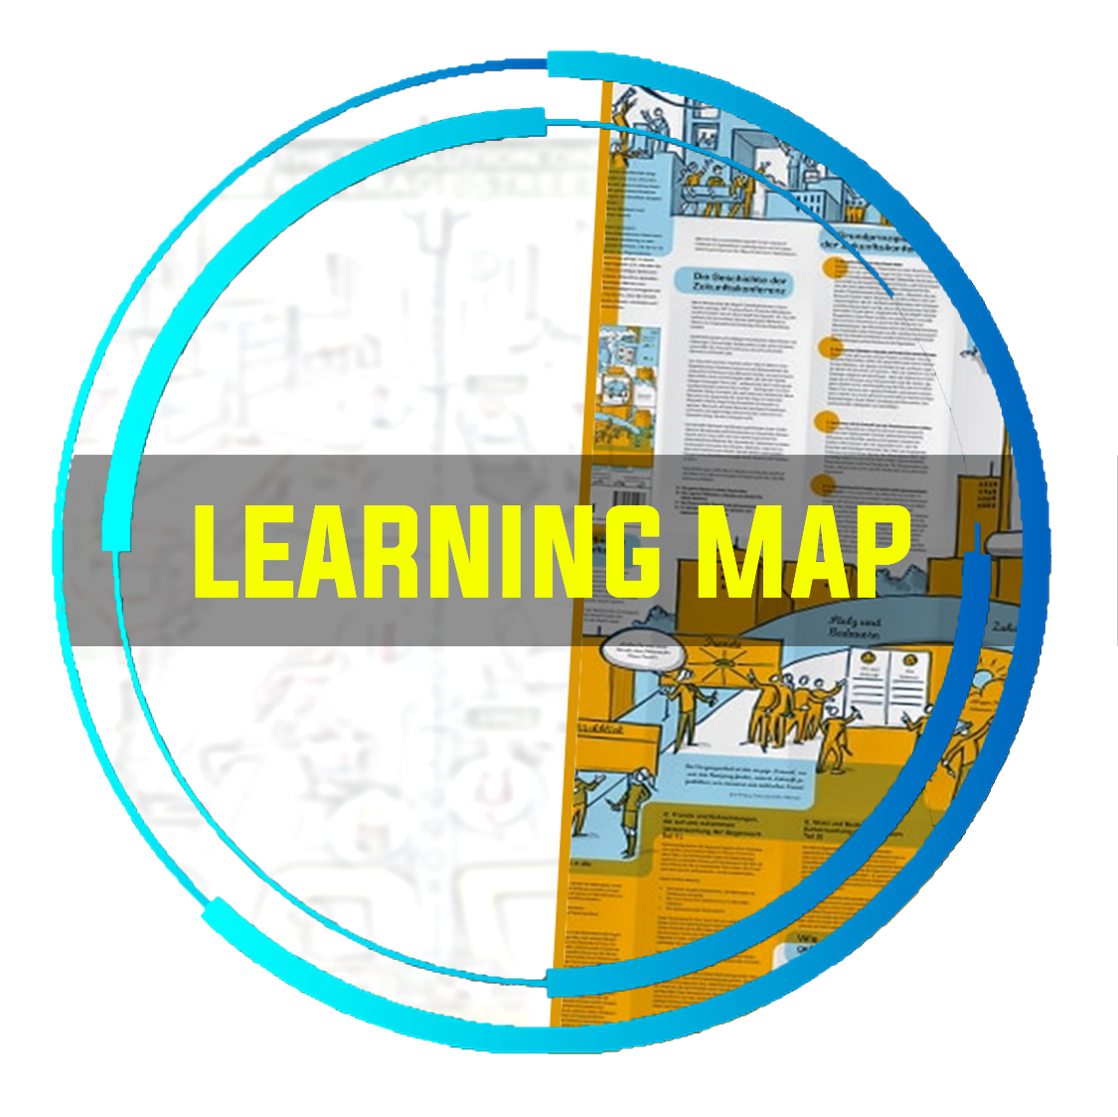 LEARNING MAP